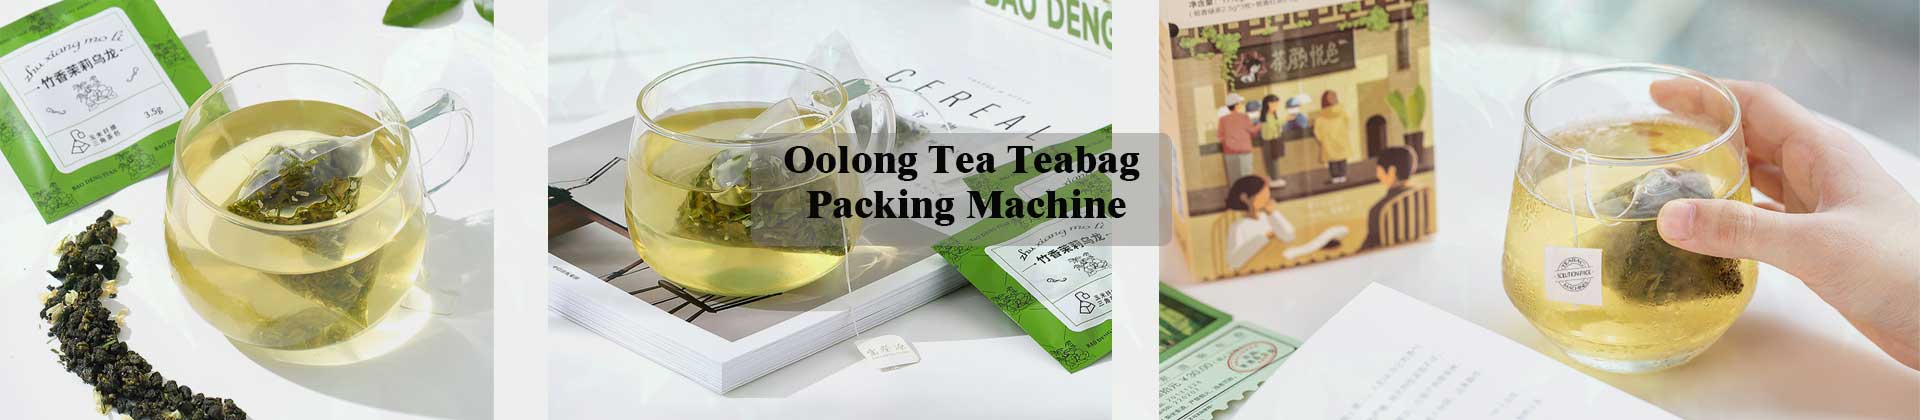 Automatic Oolong Tea Teabag Packing Machine Solution | Oolong Tea Pyramid Teabag | Teabag Packing Machine Banner